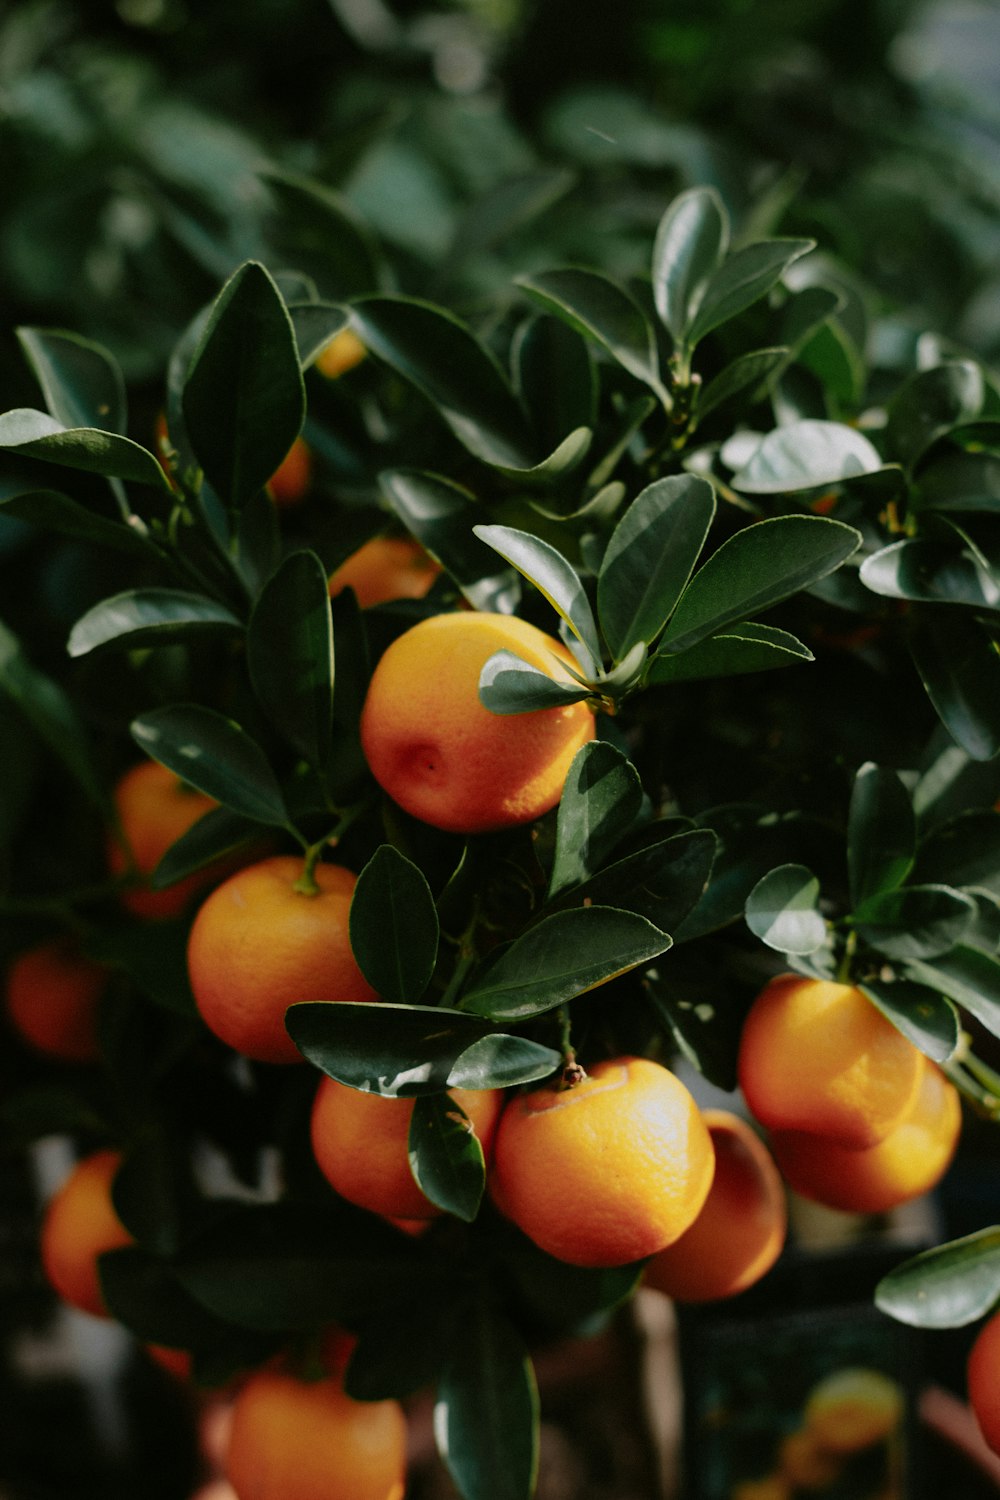 oranges growing on a tree